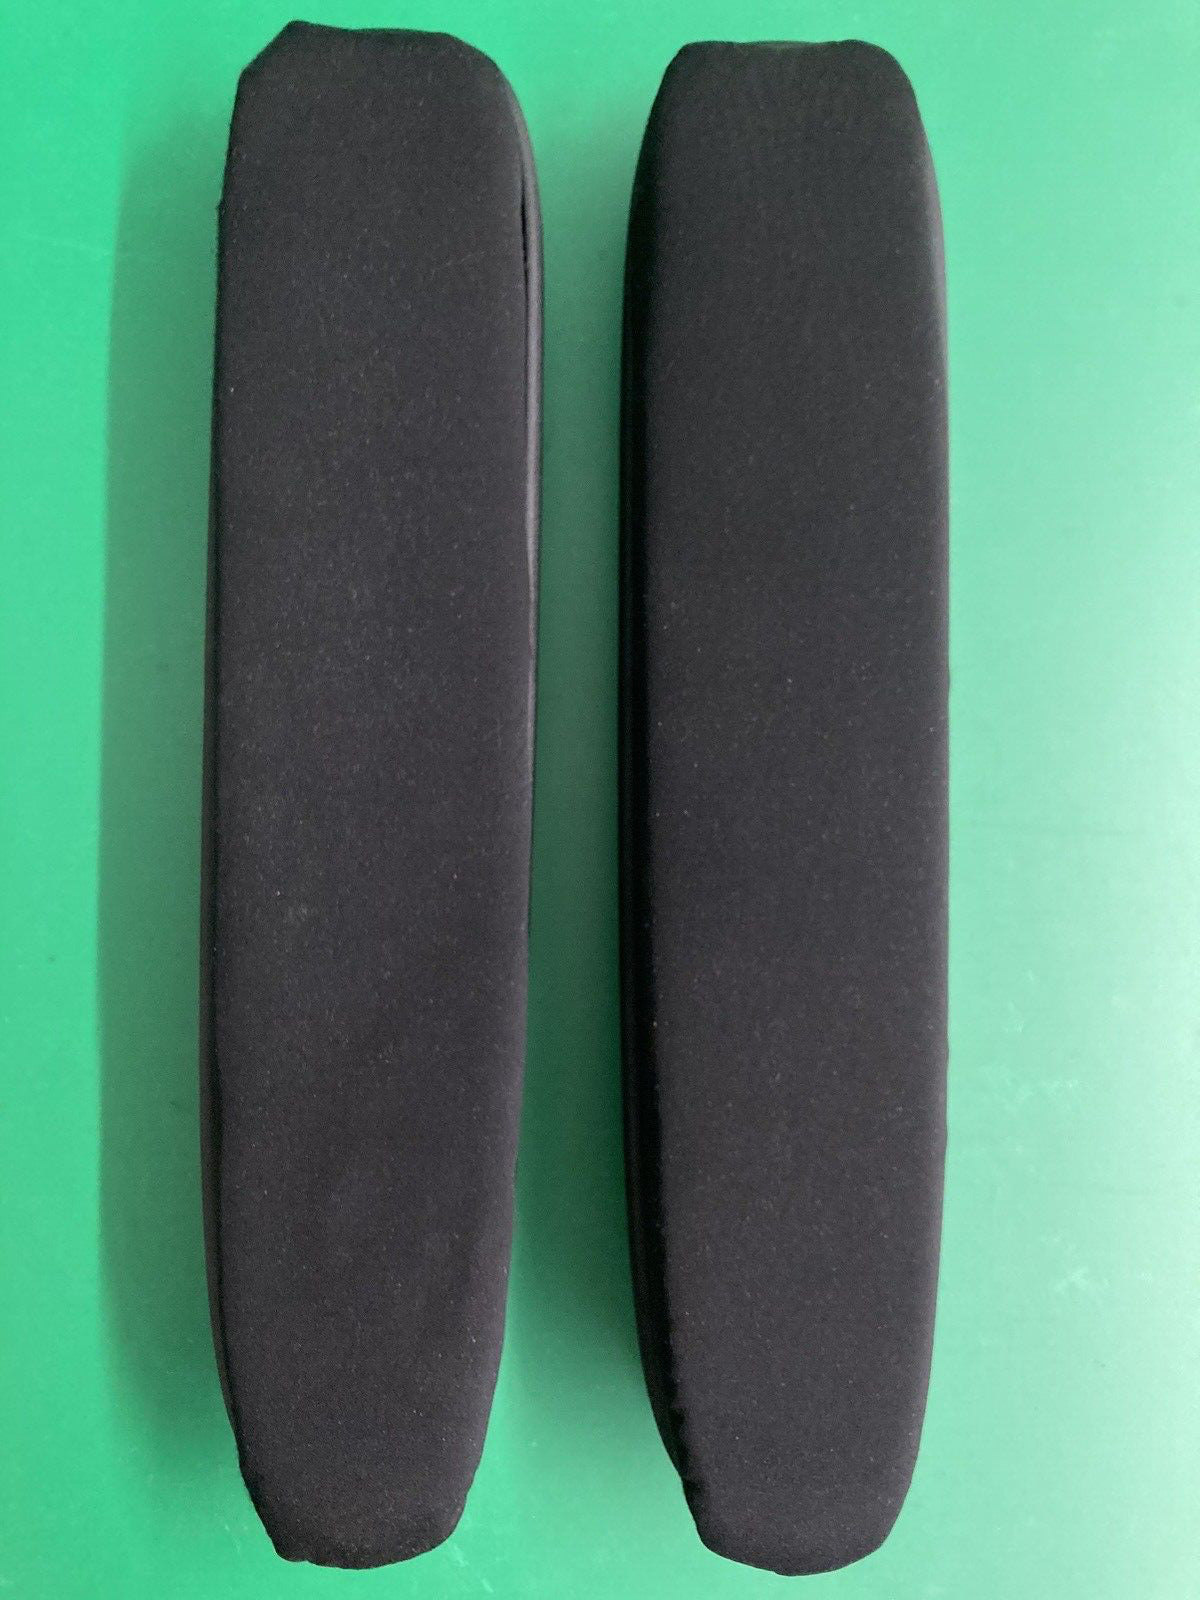 Set of 2* Permobil Gel 18" Arm Rest Pads for Permobil Power Wheelchair #J147